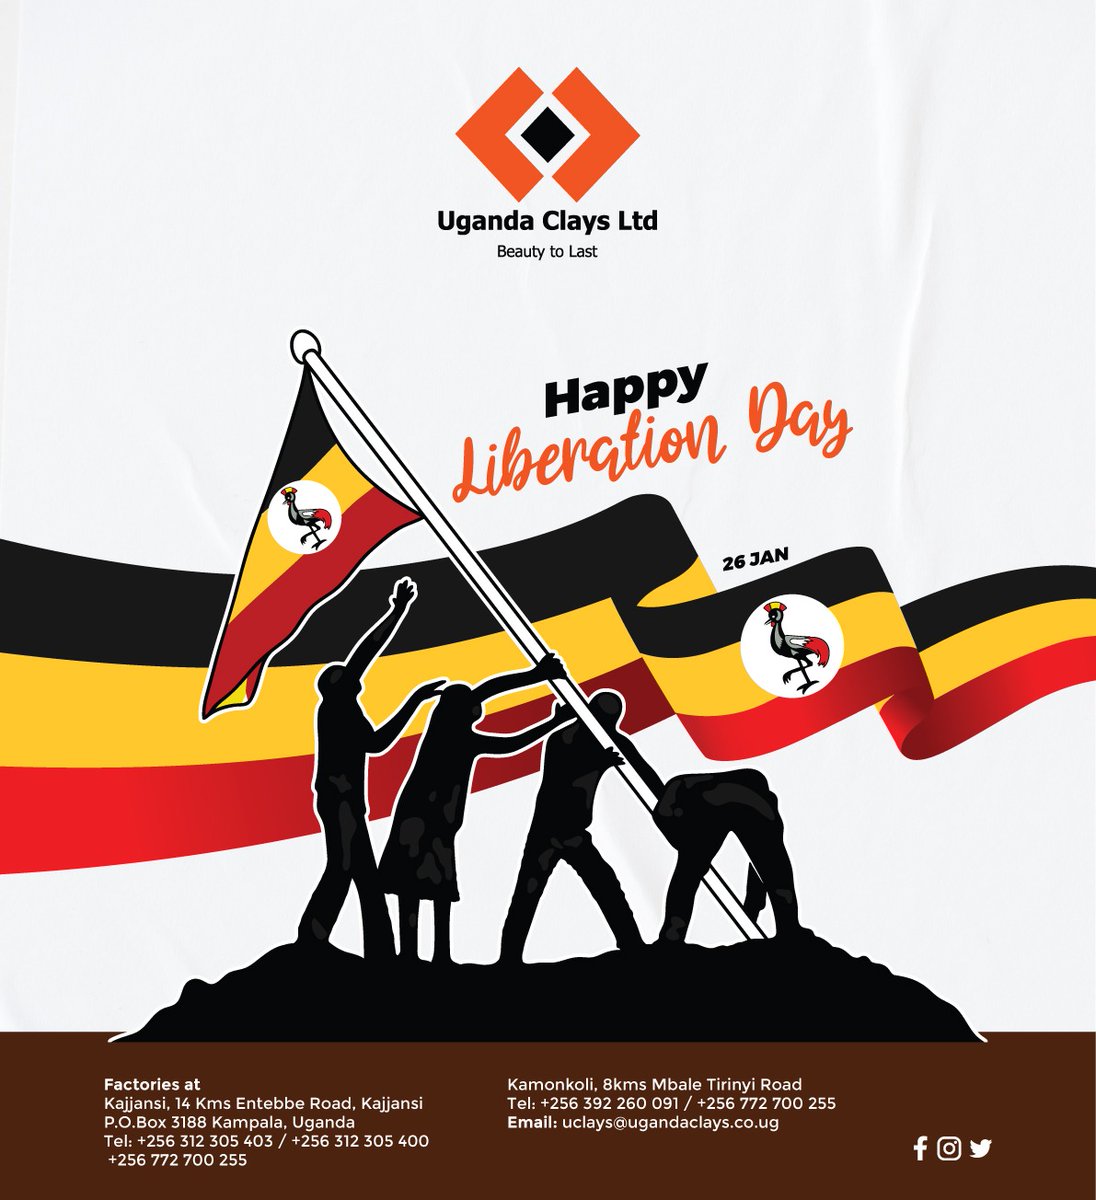 “Warm greetings on this Liberation Day celebrations. Let us remember this day with great pride and be thankful to those who brought freedom and liberation to us.”